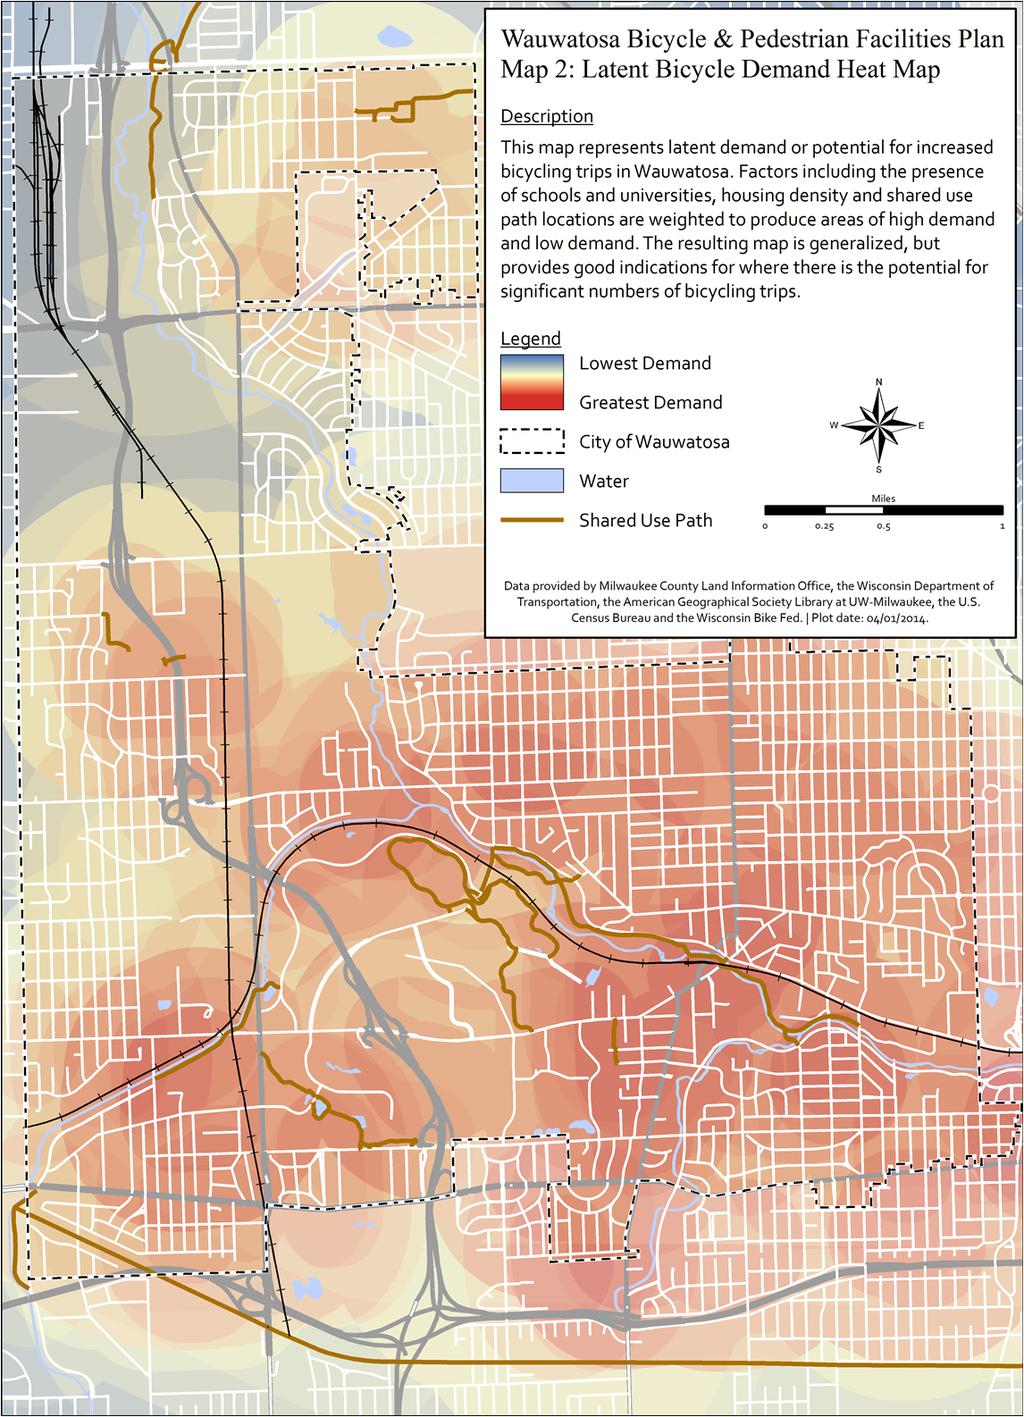 City of Wauwatosa Bicycle & Pedestrian Facilities Plan Figure 4: Map of latent